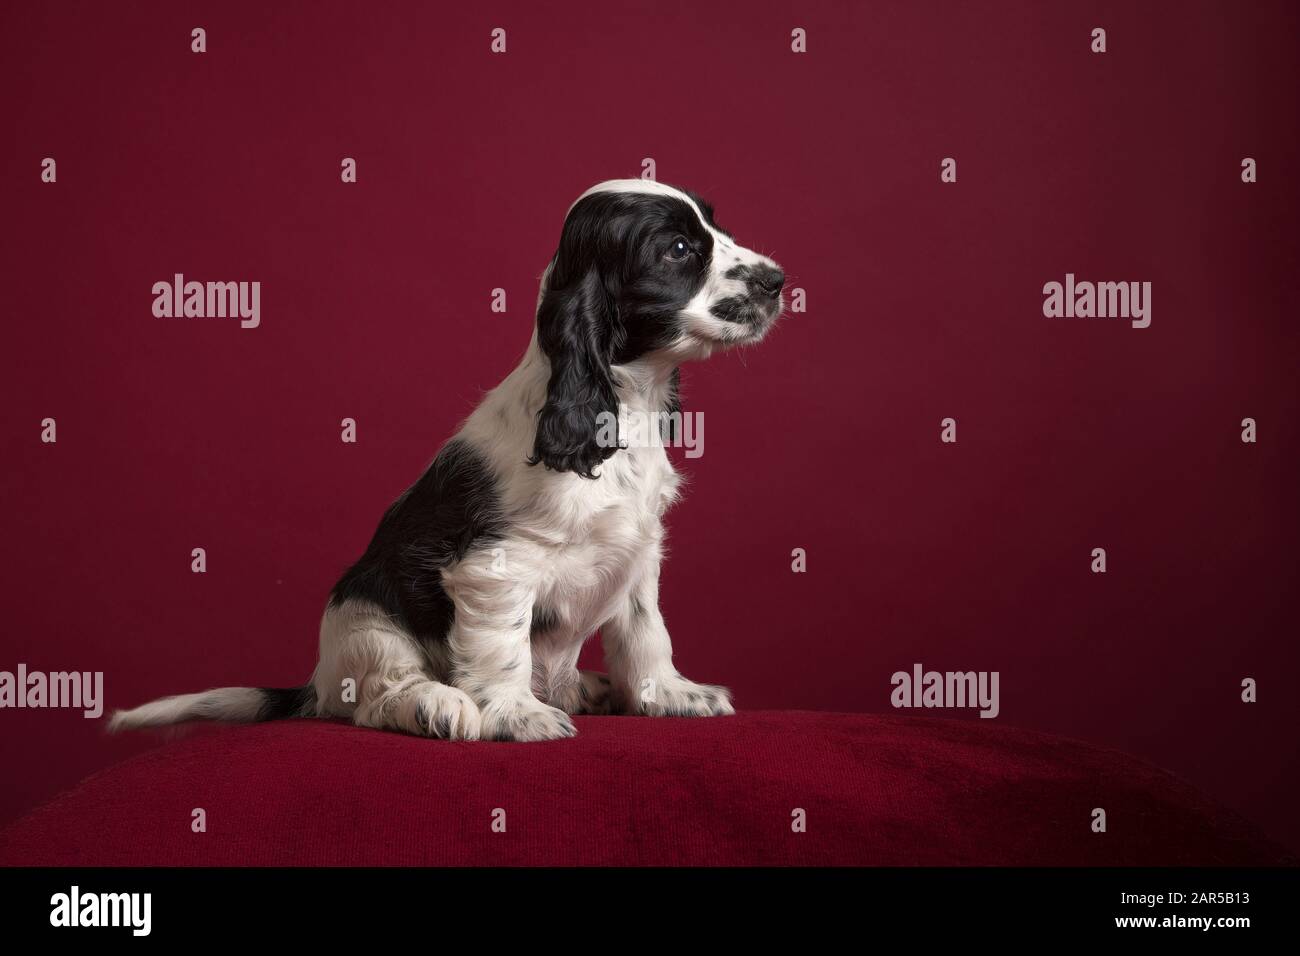 Black and white Cocker spaniel puppy , sitting on a classic luxury burgundy red background seen from the side Stock Photo